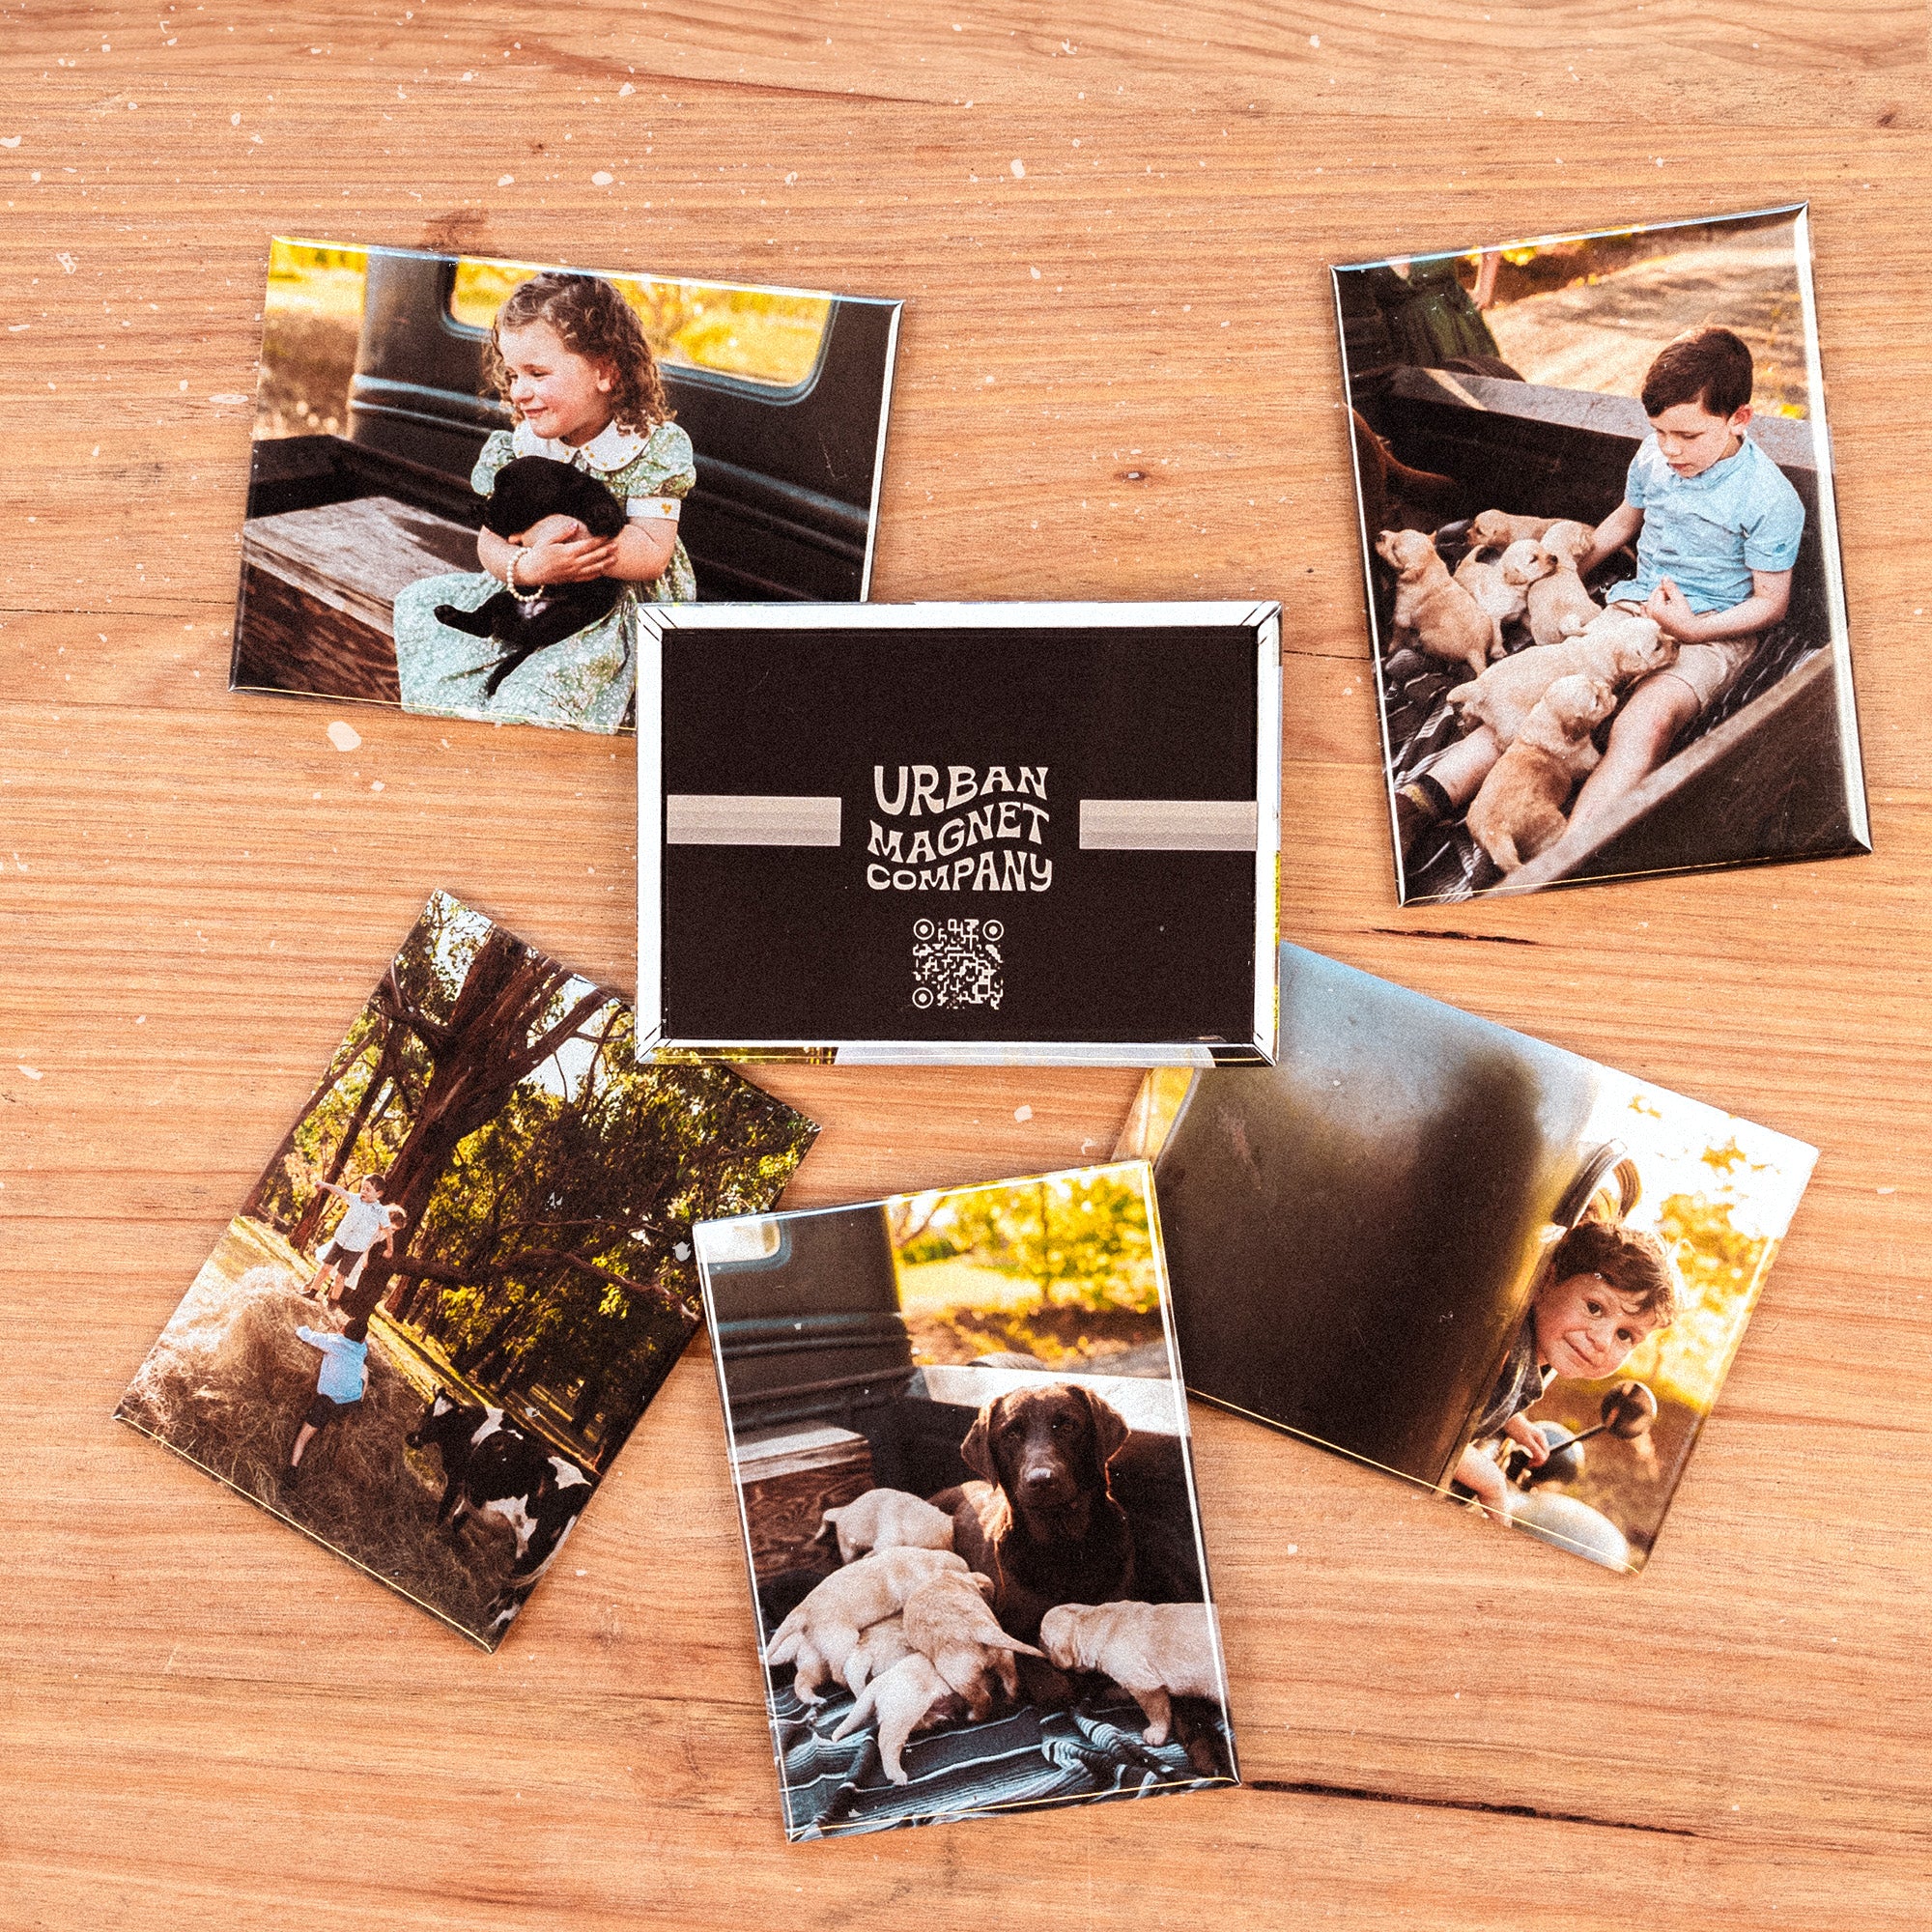 Five magnets printed with photos of children and puppies, and one magnet printed with the Urban Magnet Co logo, all displayed on a wooden table. 